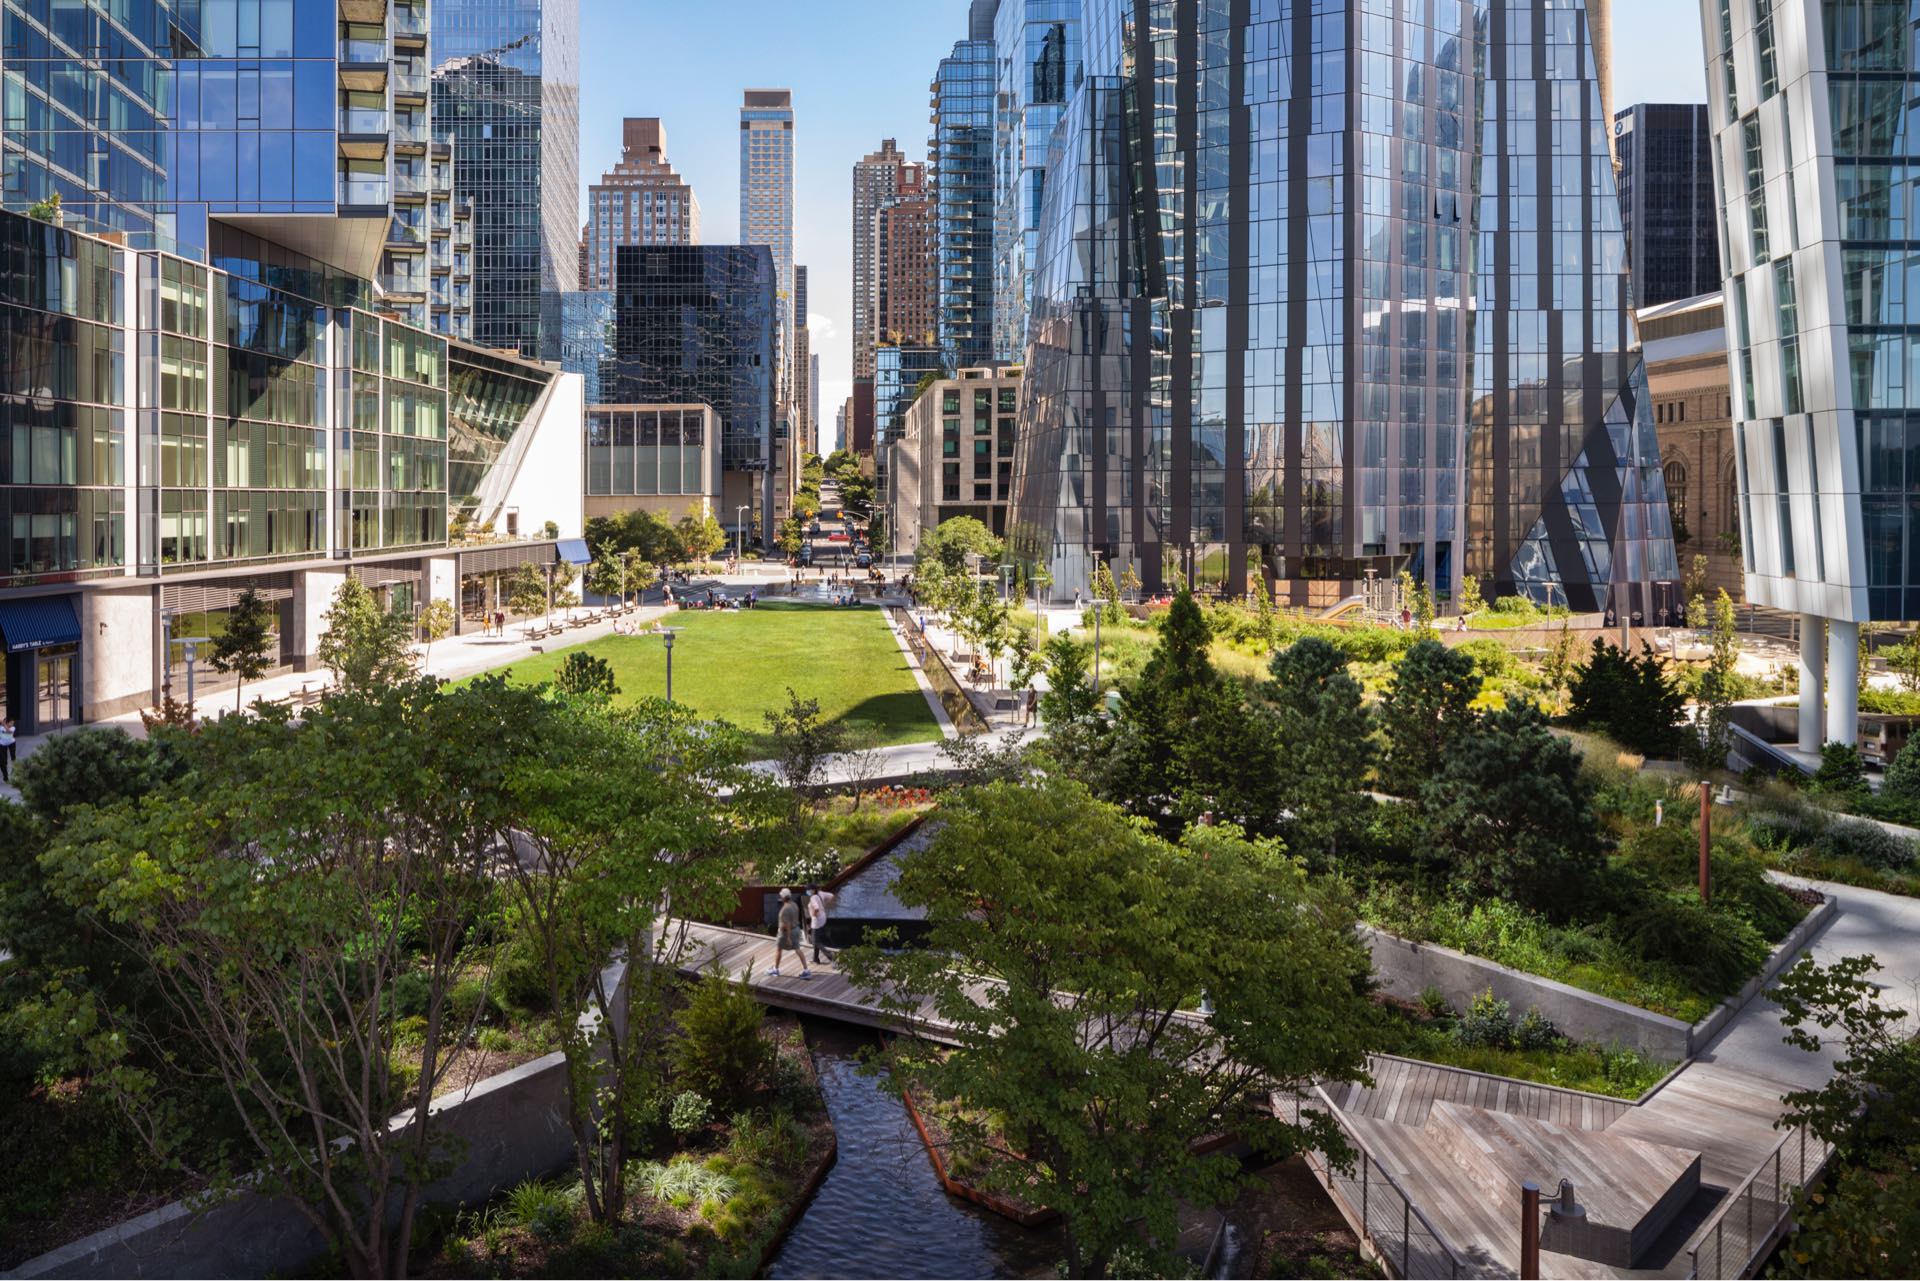 Modern urban park nestled between sleek high-rise buildings, offering a green escape with walking paths, seating areas, and lush landscaping in the heart of a bustling city.